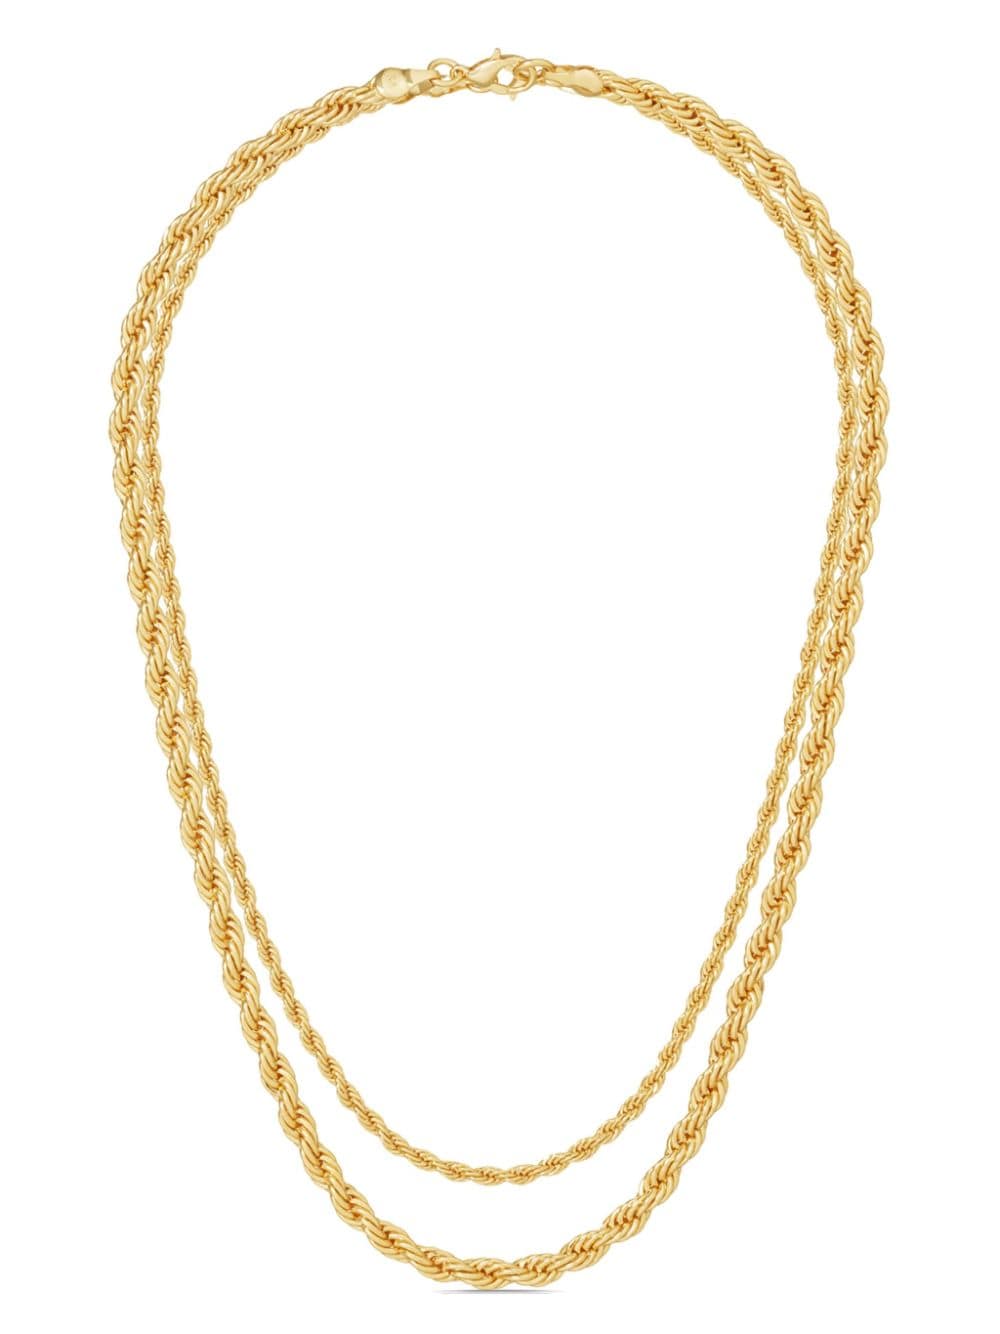 Roxanne Assoulin On The Ropes necklaces (set of two) - Oro